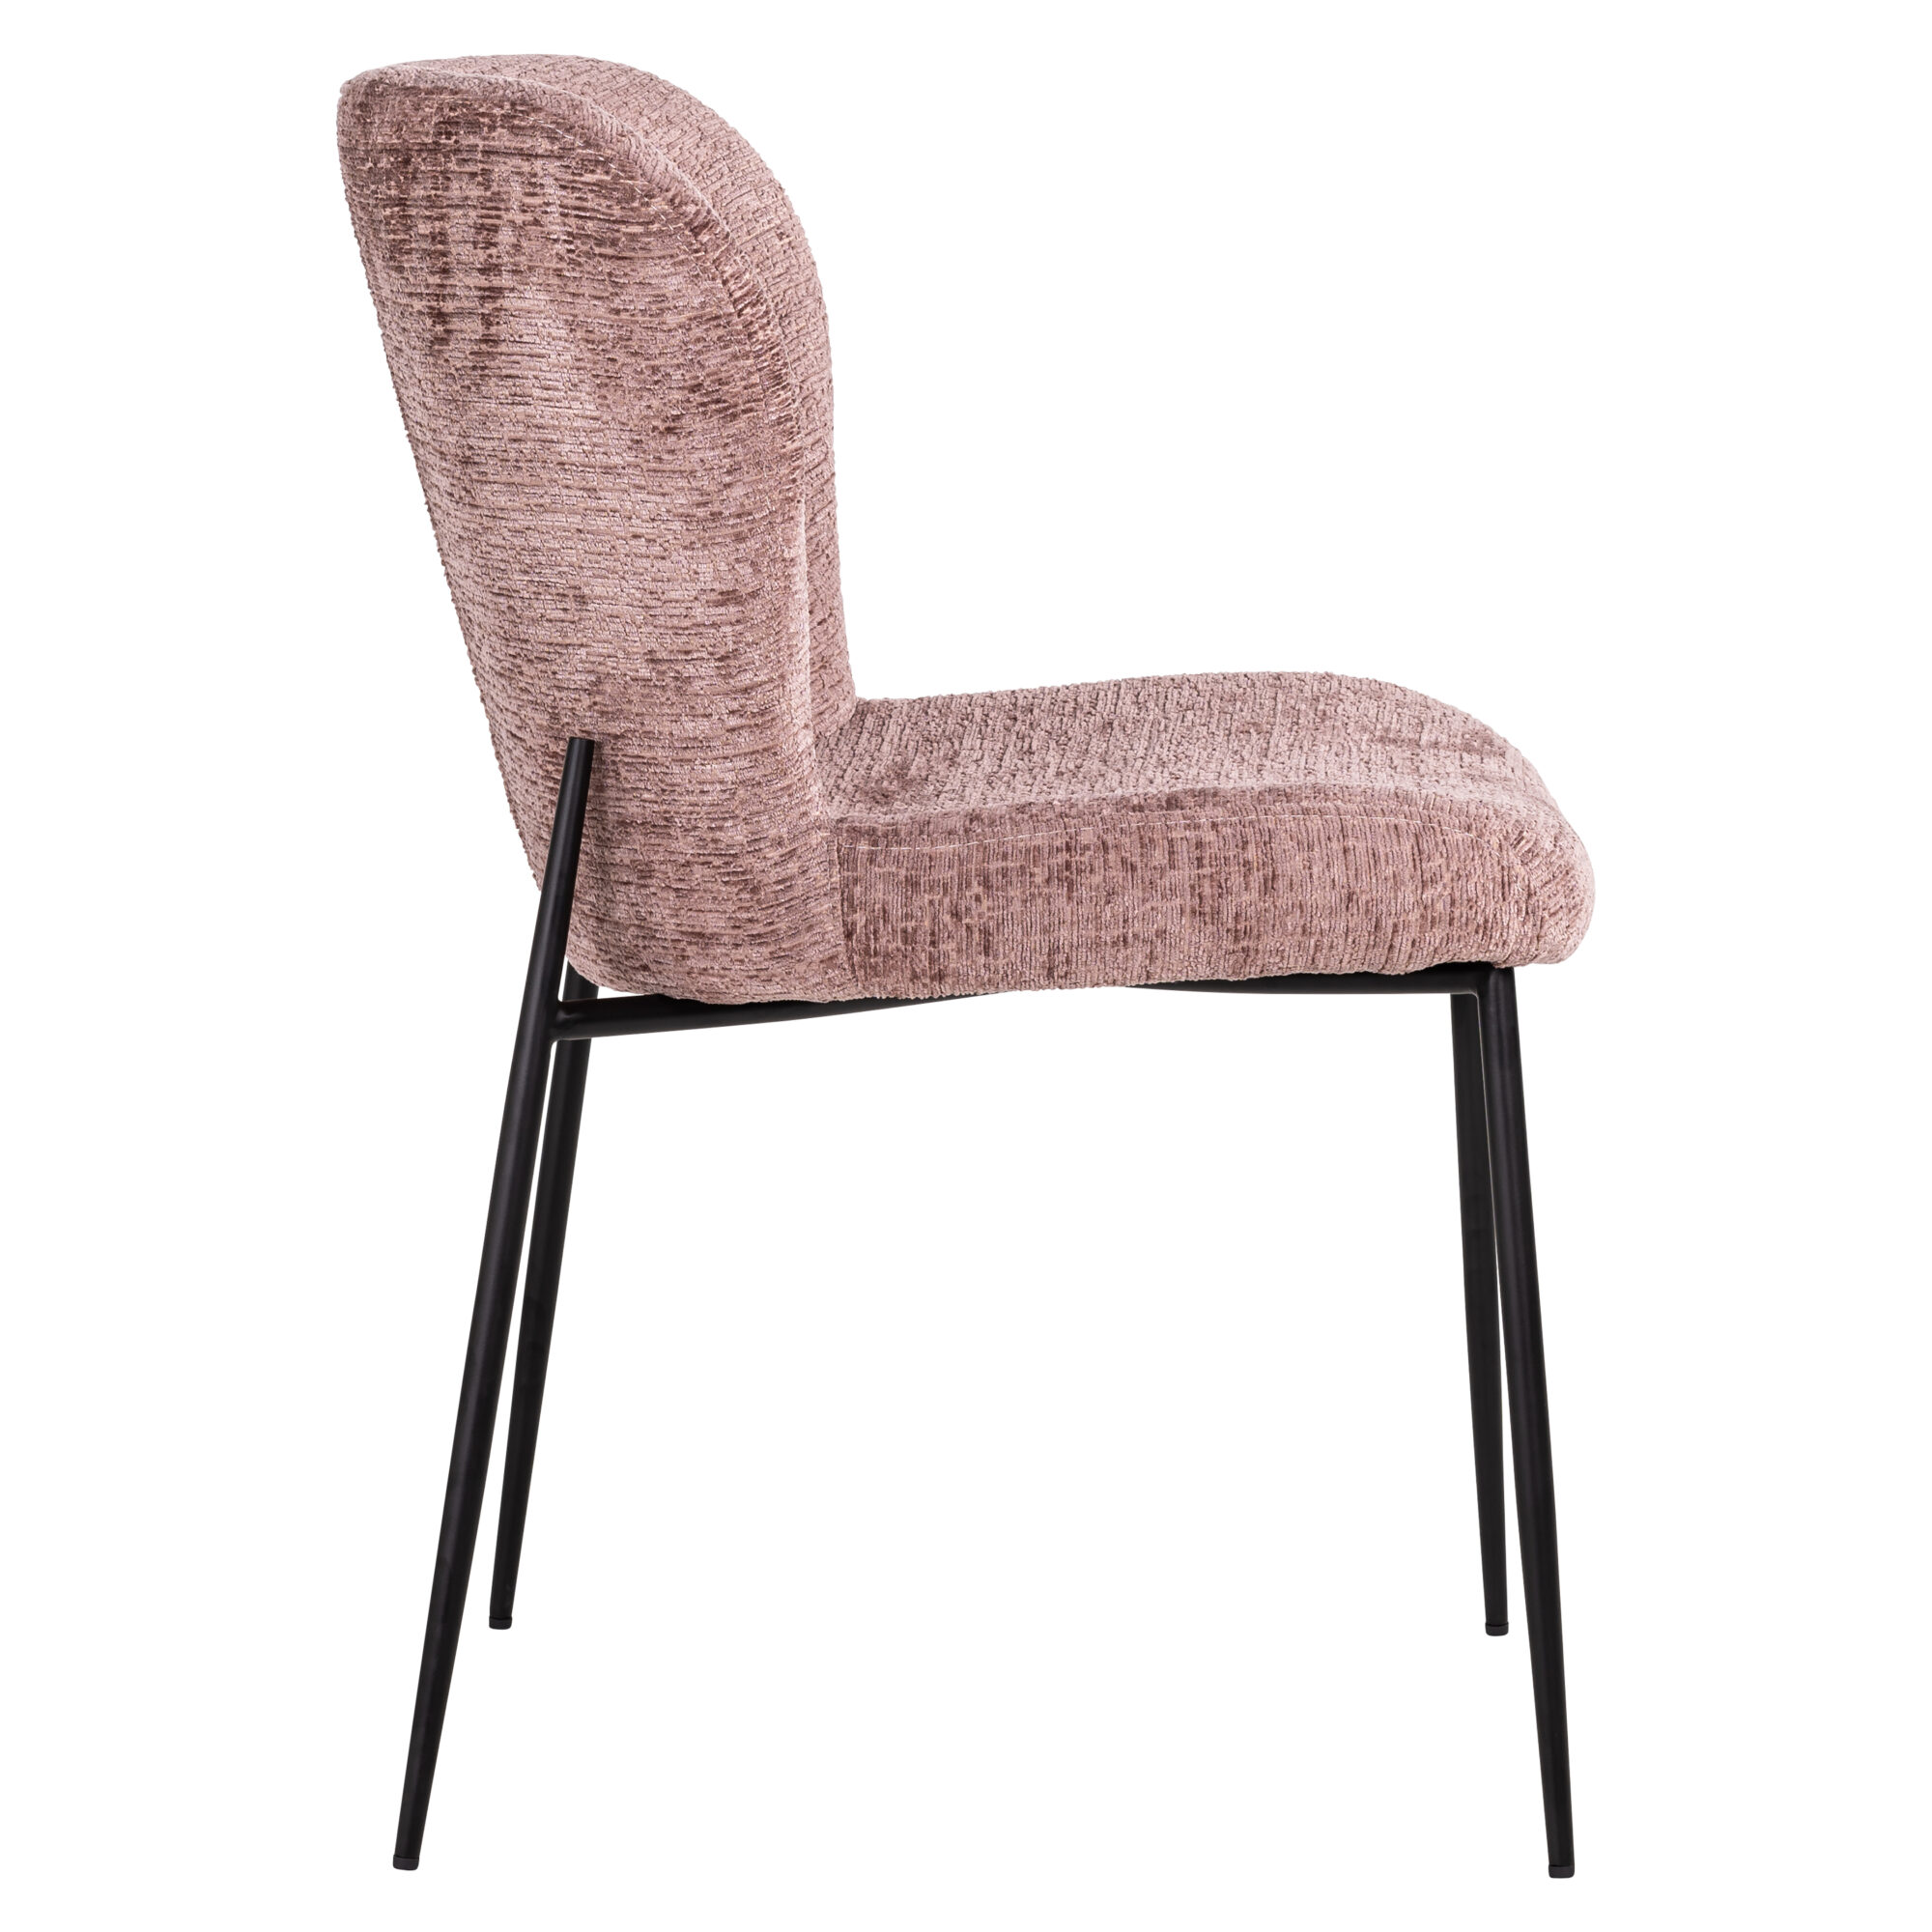 Chaise Darby rose pale fusion Richmond Interiors 1